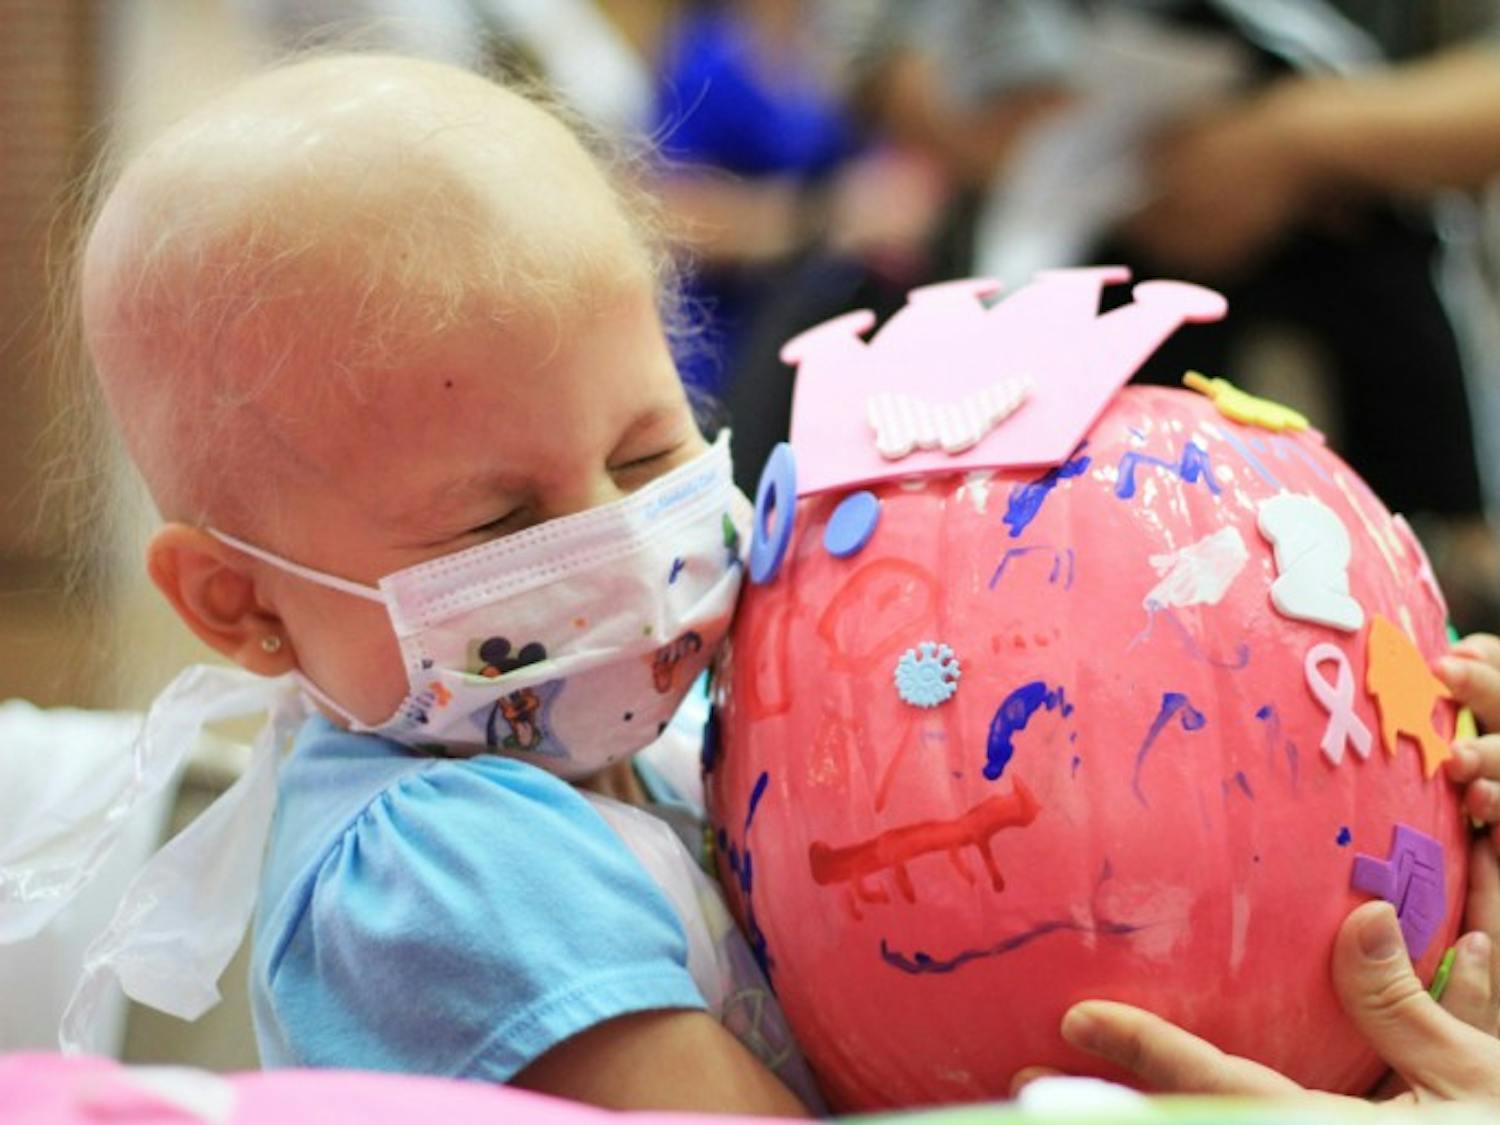 Madison, a 4-year-old undergoing treatment for leukemia at Shands Hospital for Children at UF, holds her pink pumpkin on Wednesday morning as part of an event for patients and families.